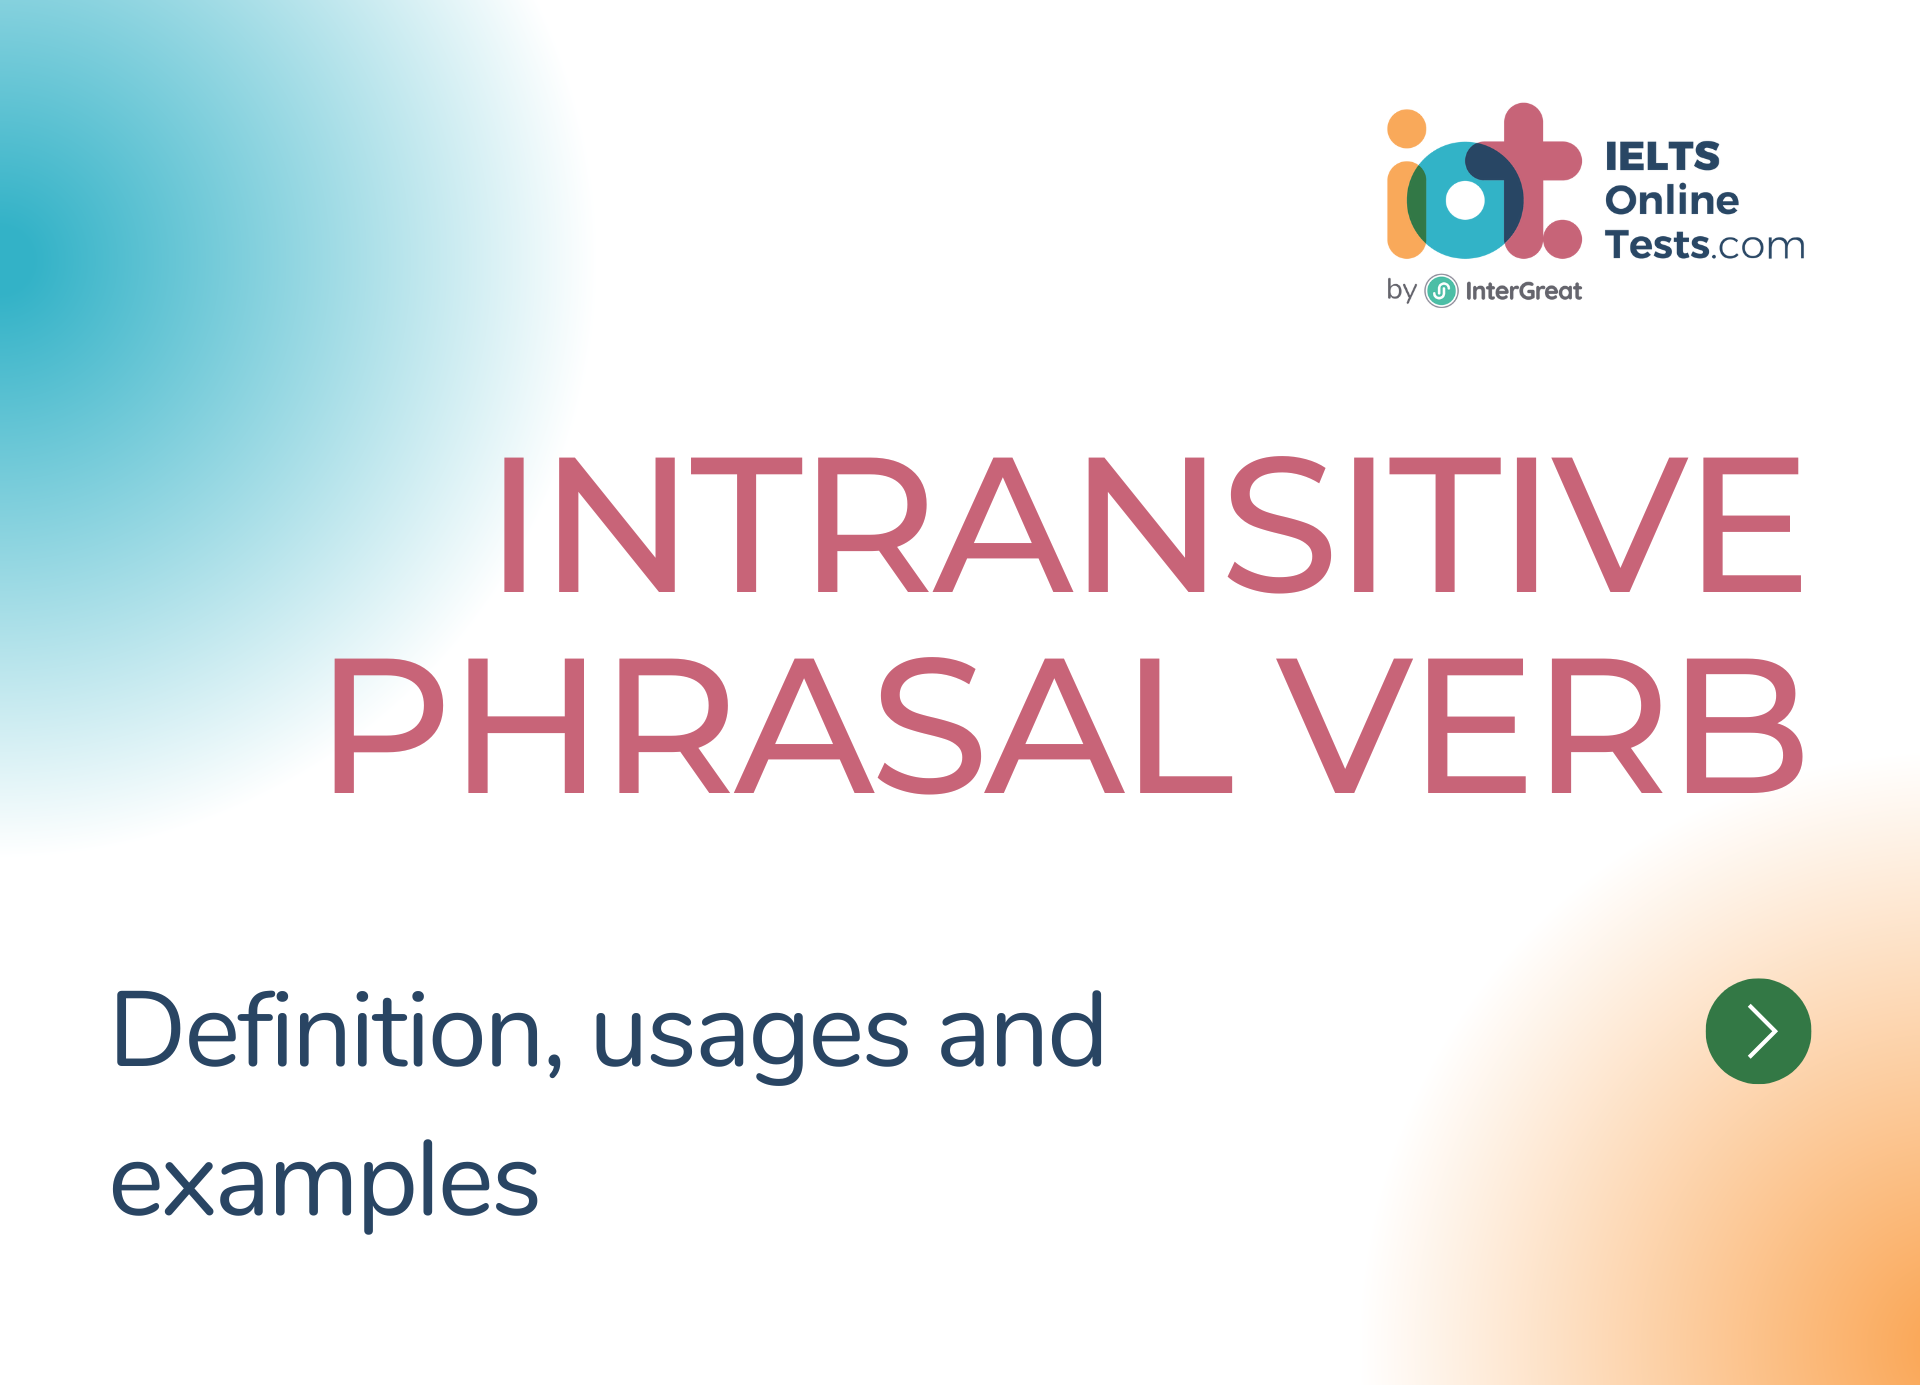 Intransitive Phrasal Verb definition, usages and examples